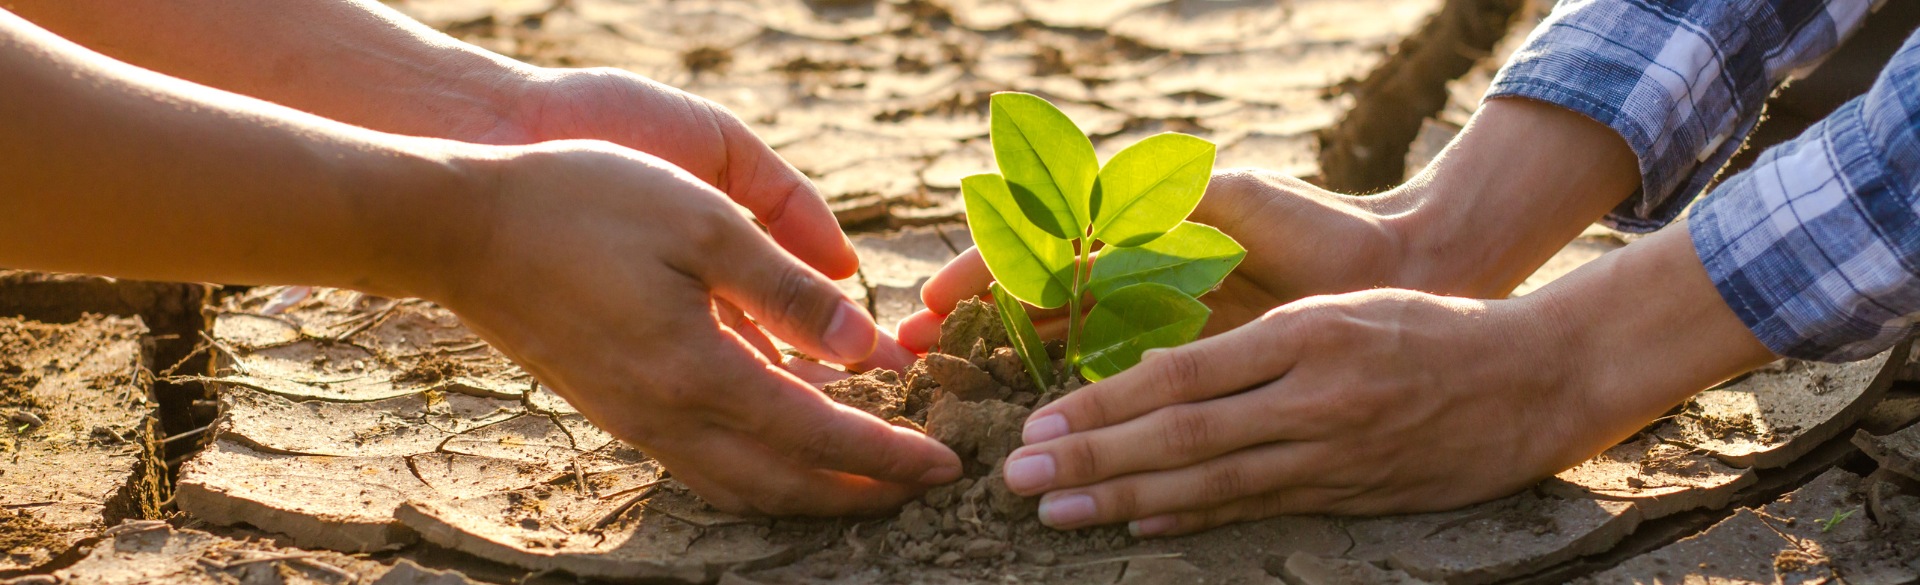 Two hands planting a plant in dry, cracked ground